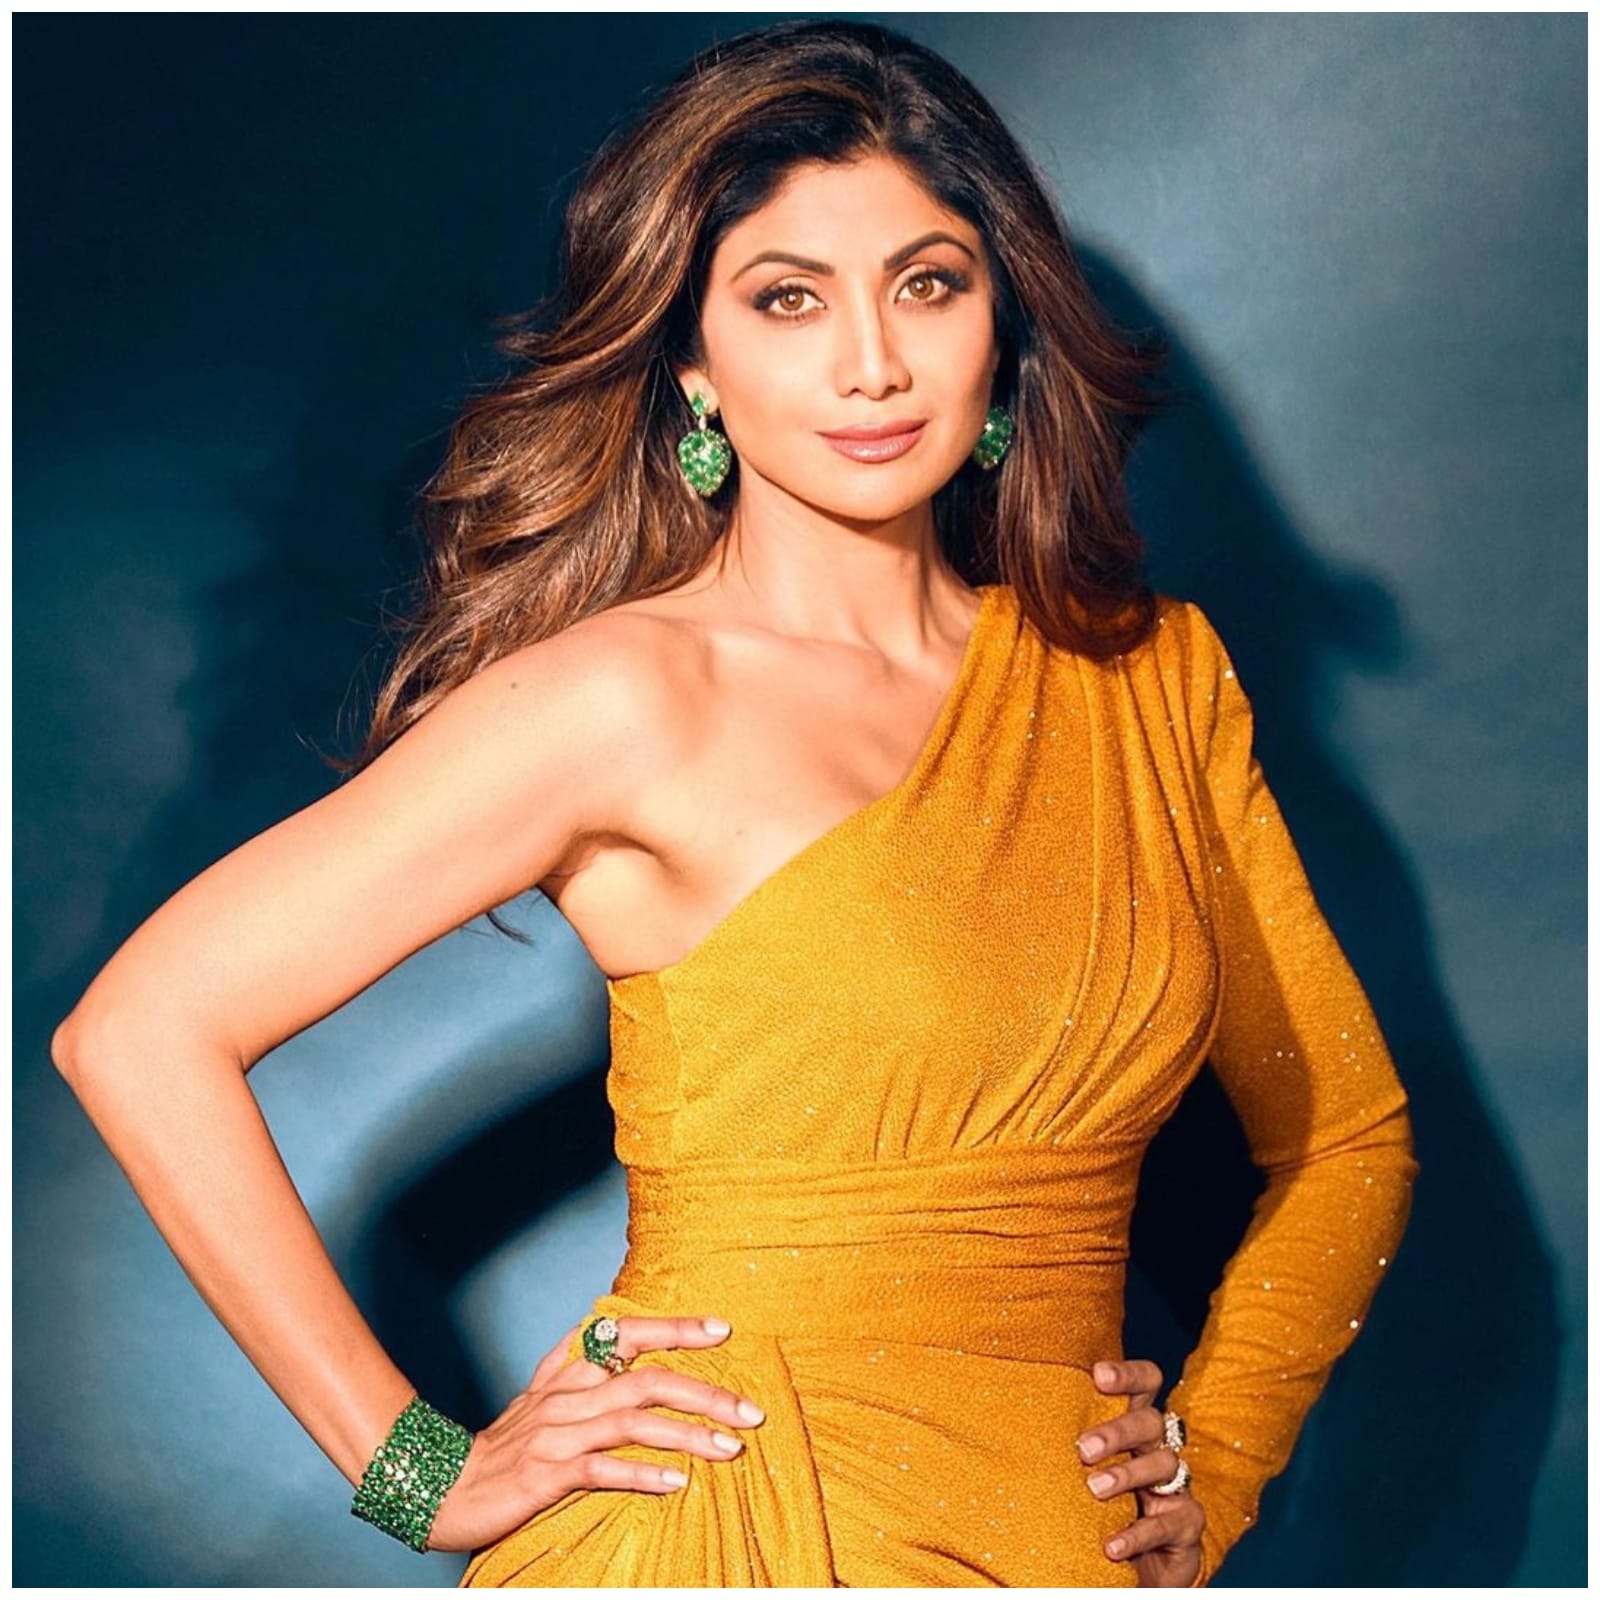 Amid Raj Kundra's Arrest, Shilpa Shetty Wishes All Fellow Indians 'Happy  Independence Day' - News18